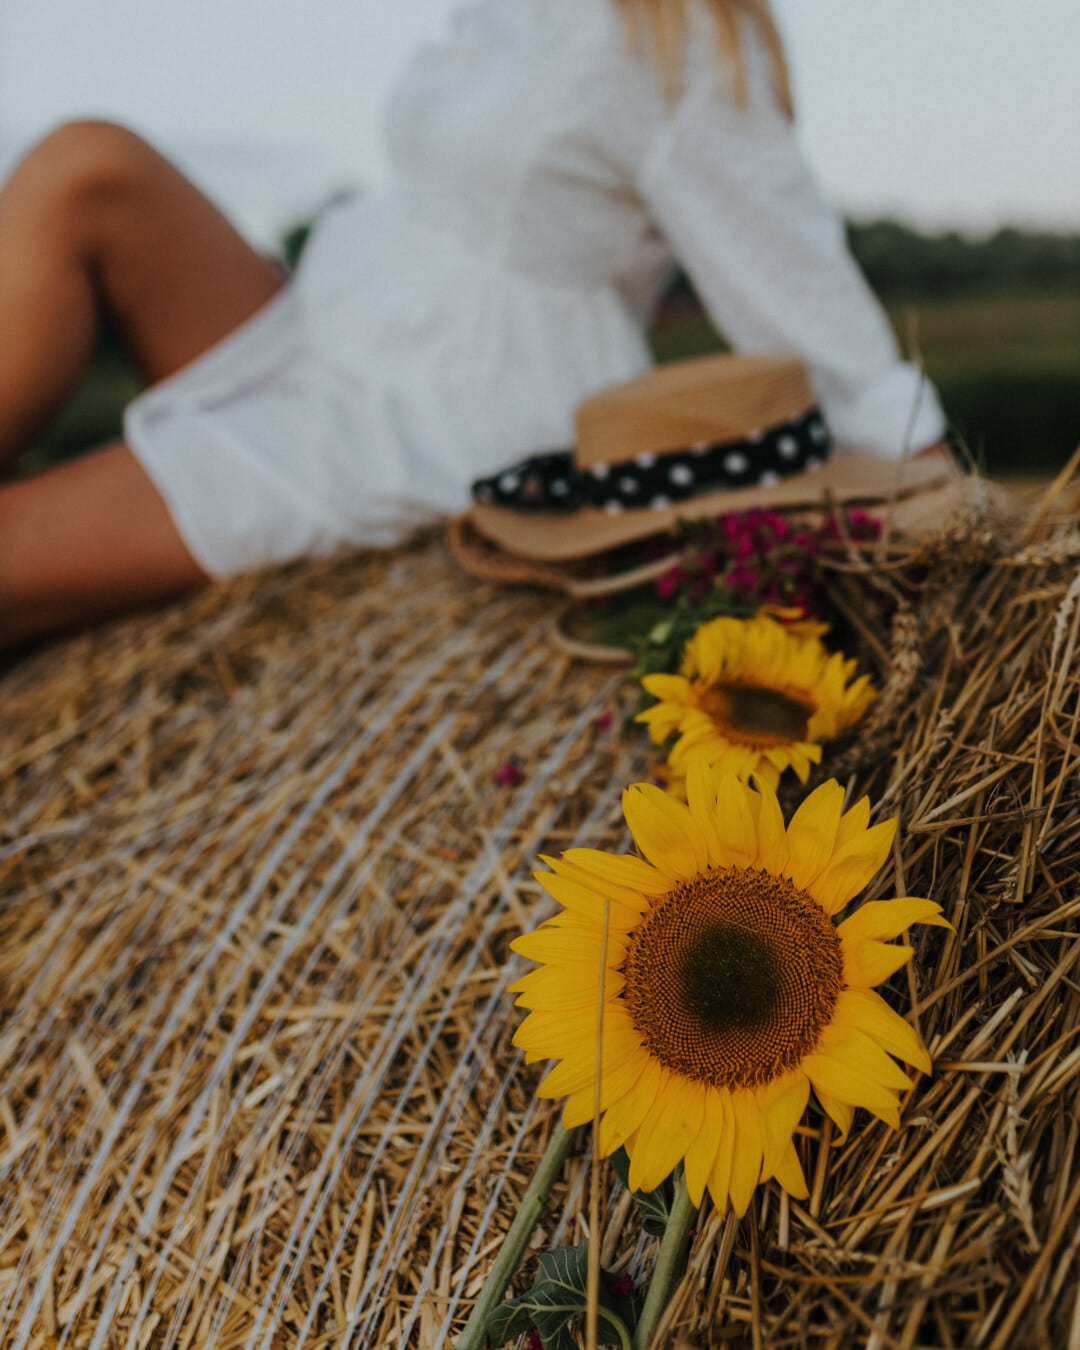 pretty girl, laying on, haystack, sunflower, nature, outdoors, summer, woman, rural, fair weather